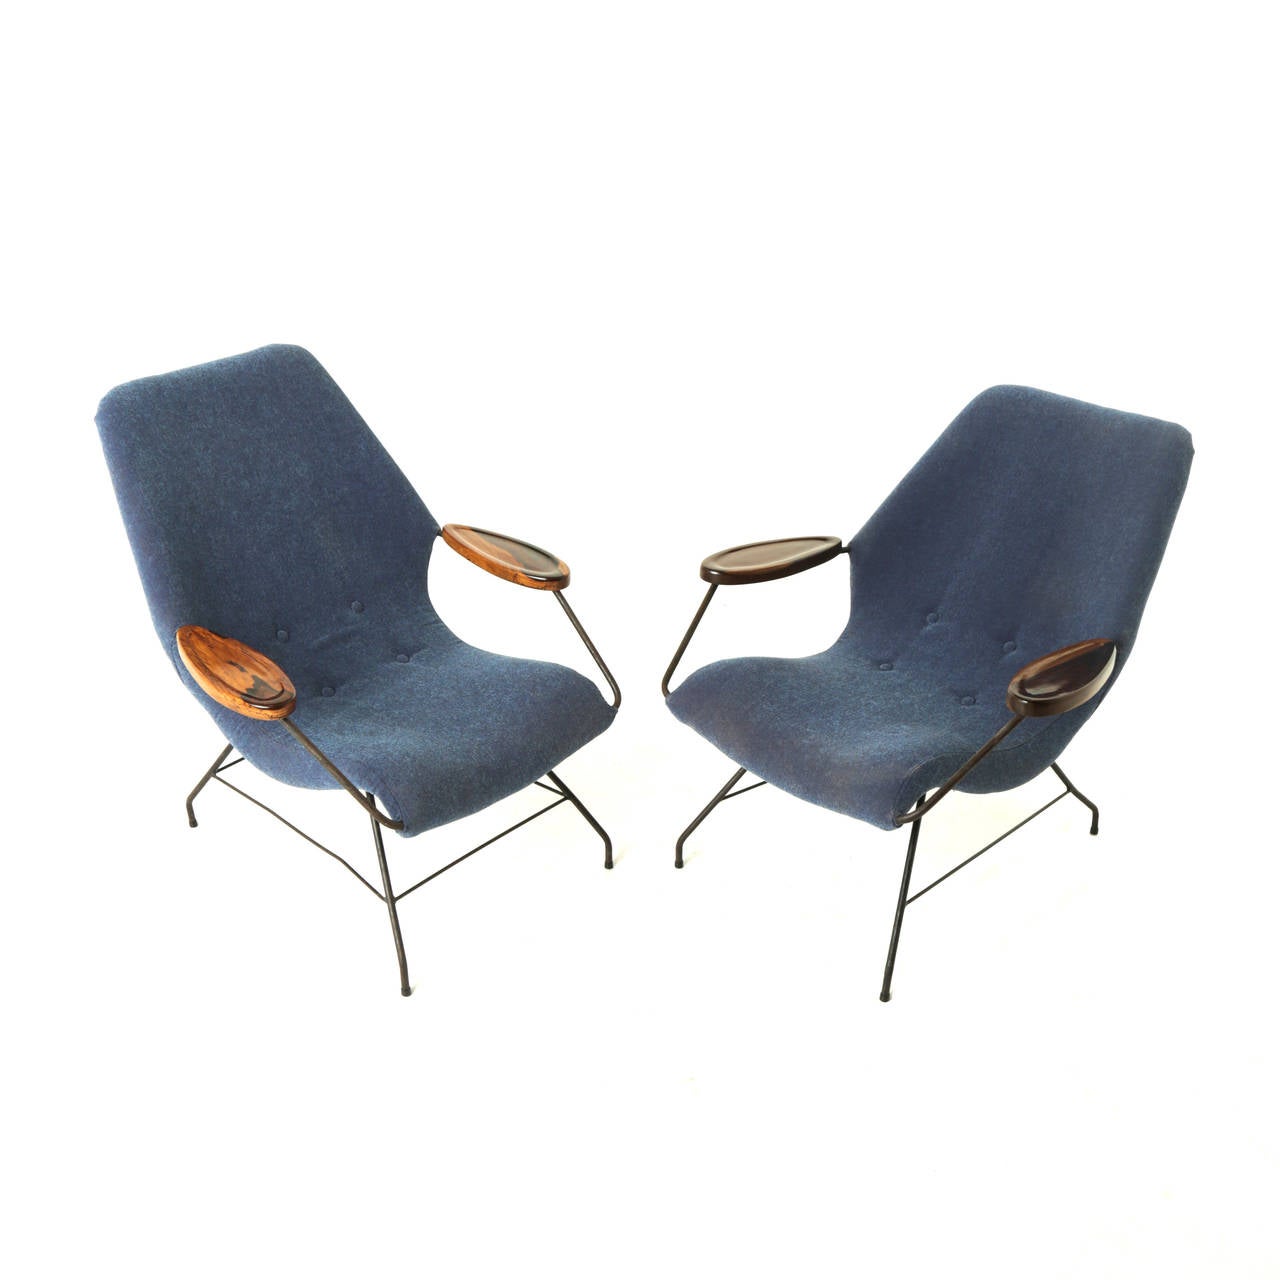 Pair of vintage Marin Eisler armchairs with thin black steel frames and solid rosewood arms with prominent sap grain. The upholstery is blue fabric. Metal shows pitting and patina consistent with age. The frames are slightly different. One frame has